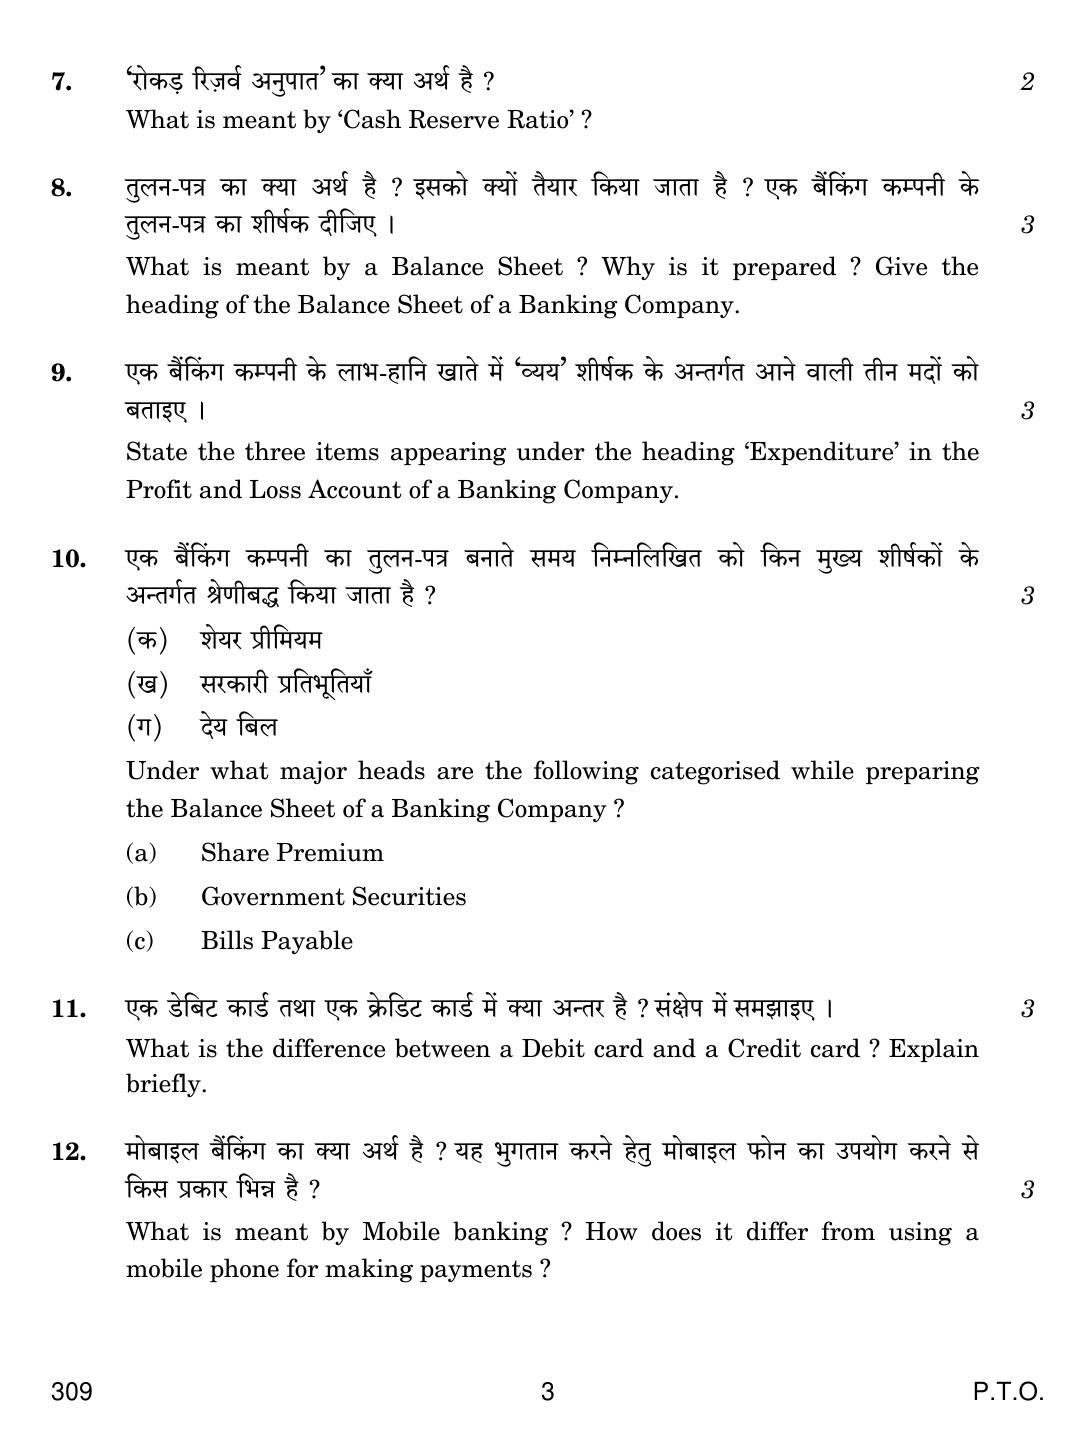 CBSE Class 12 309 BANKING 2018 Question Paper - Page 3